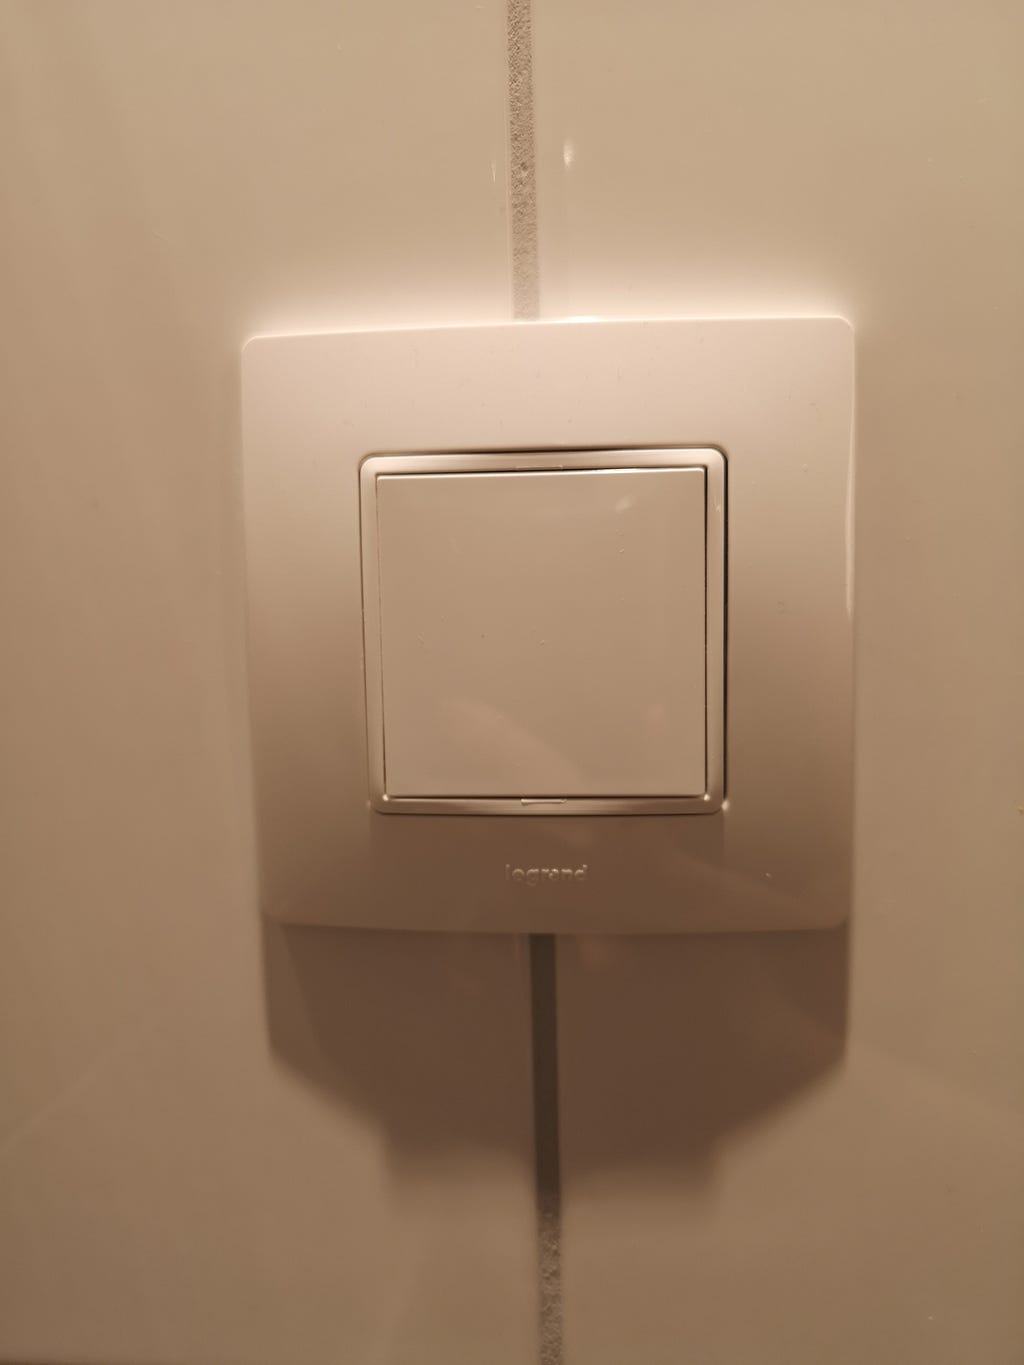 A fake power plug that existed in the bathroom and that I thought was where the hairdryer connected.